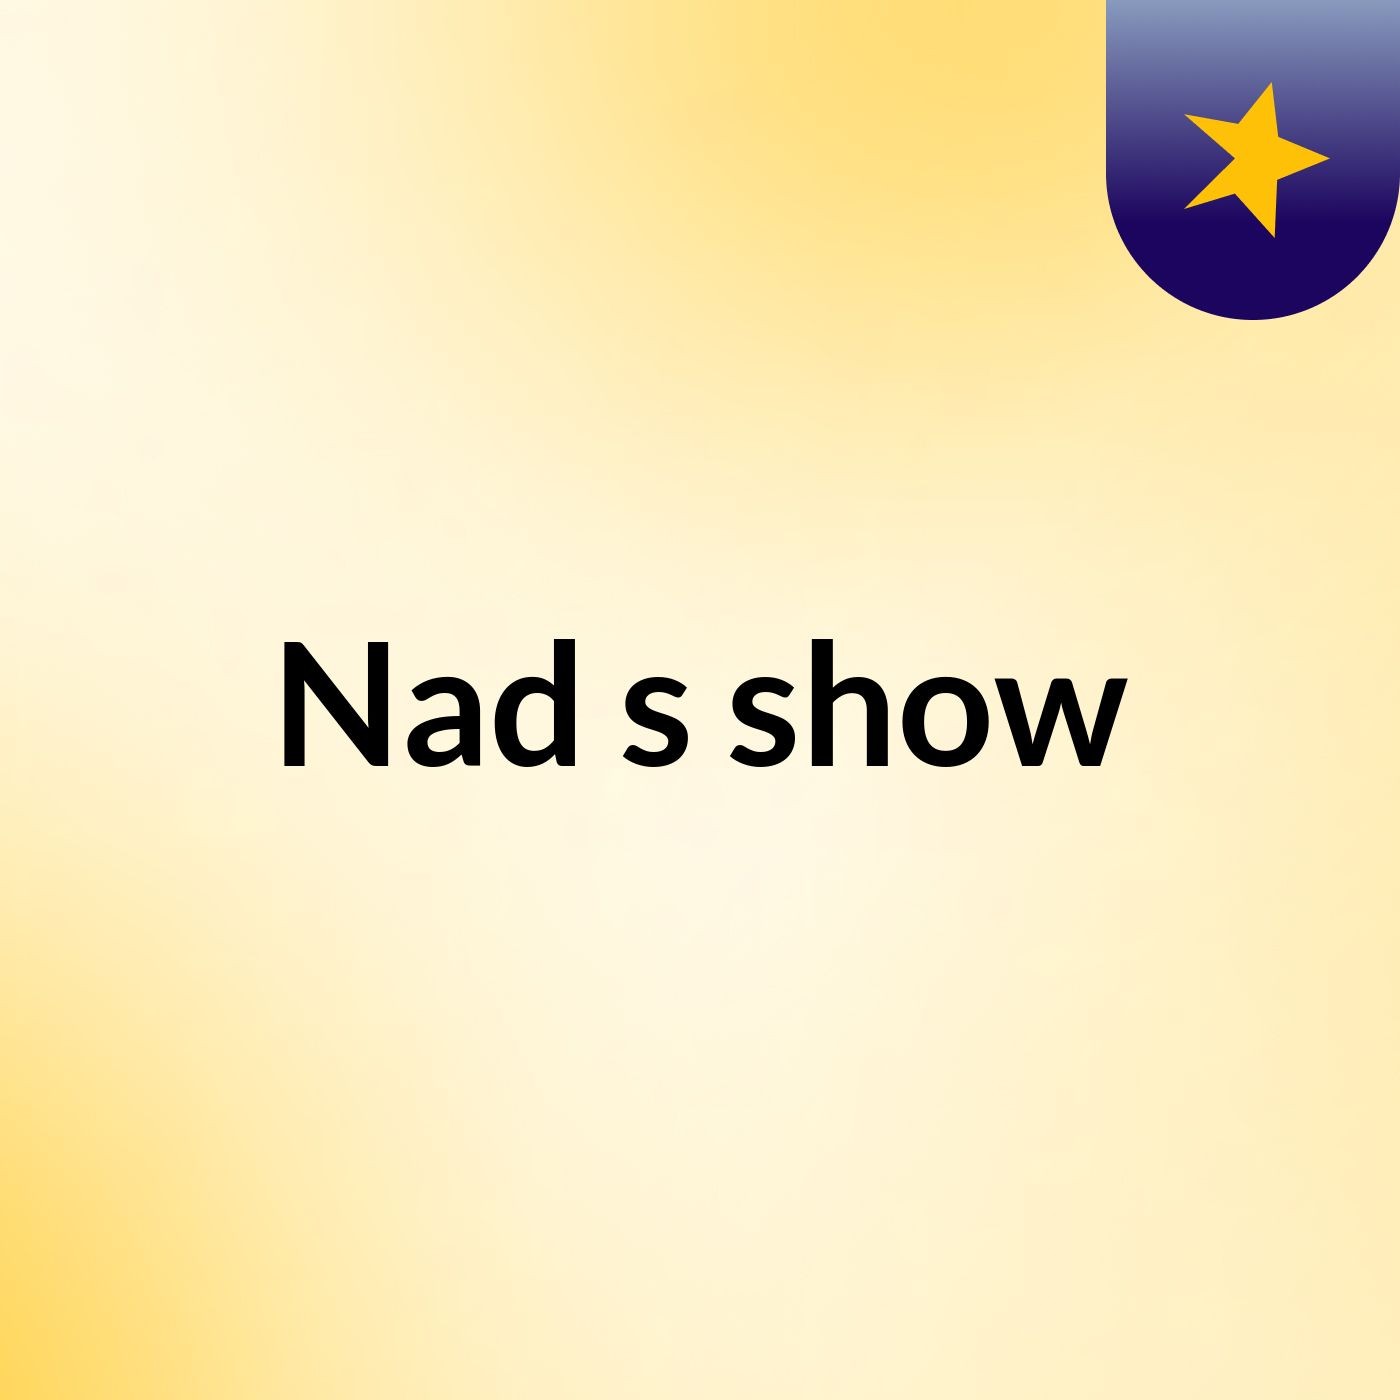 Nad's show